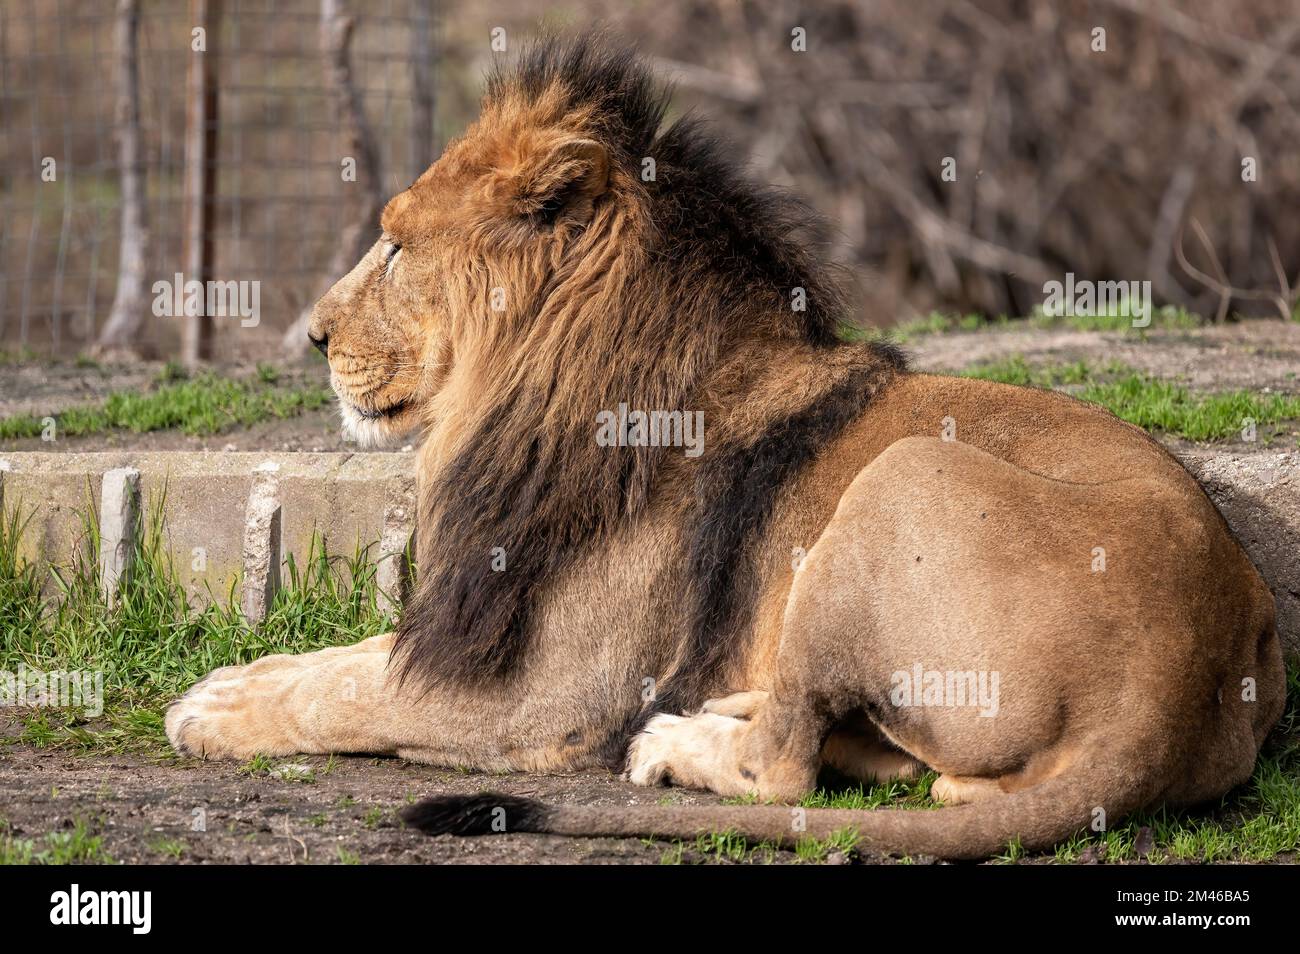 Asiatic lion in captivity lying in its enclosure sunbathing Stock Photo